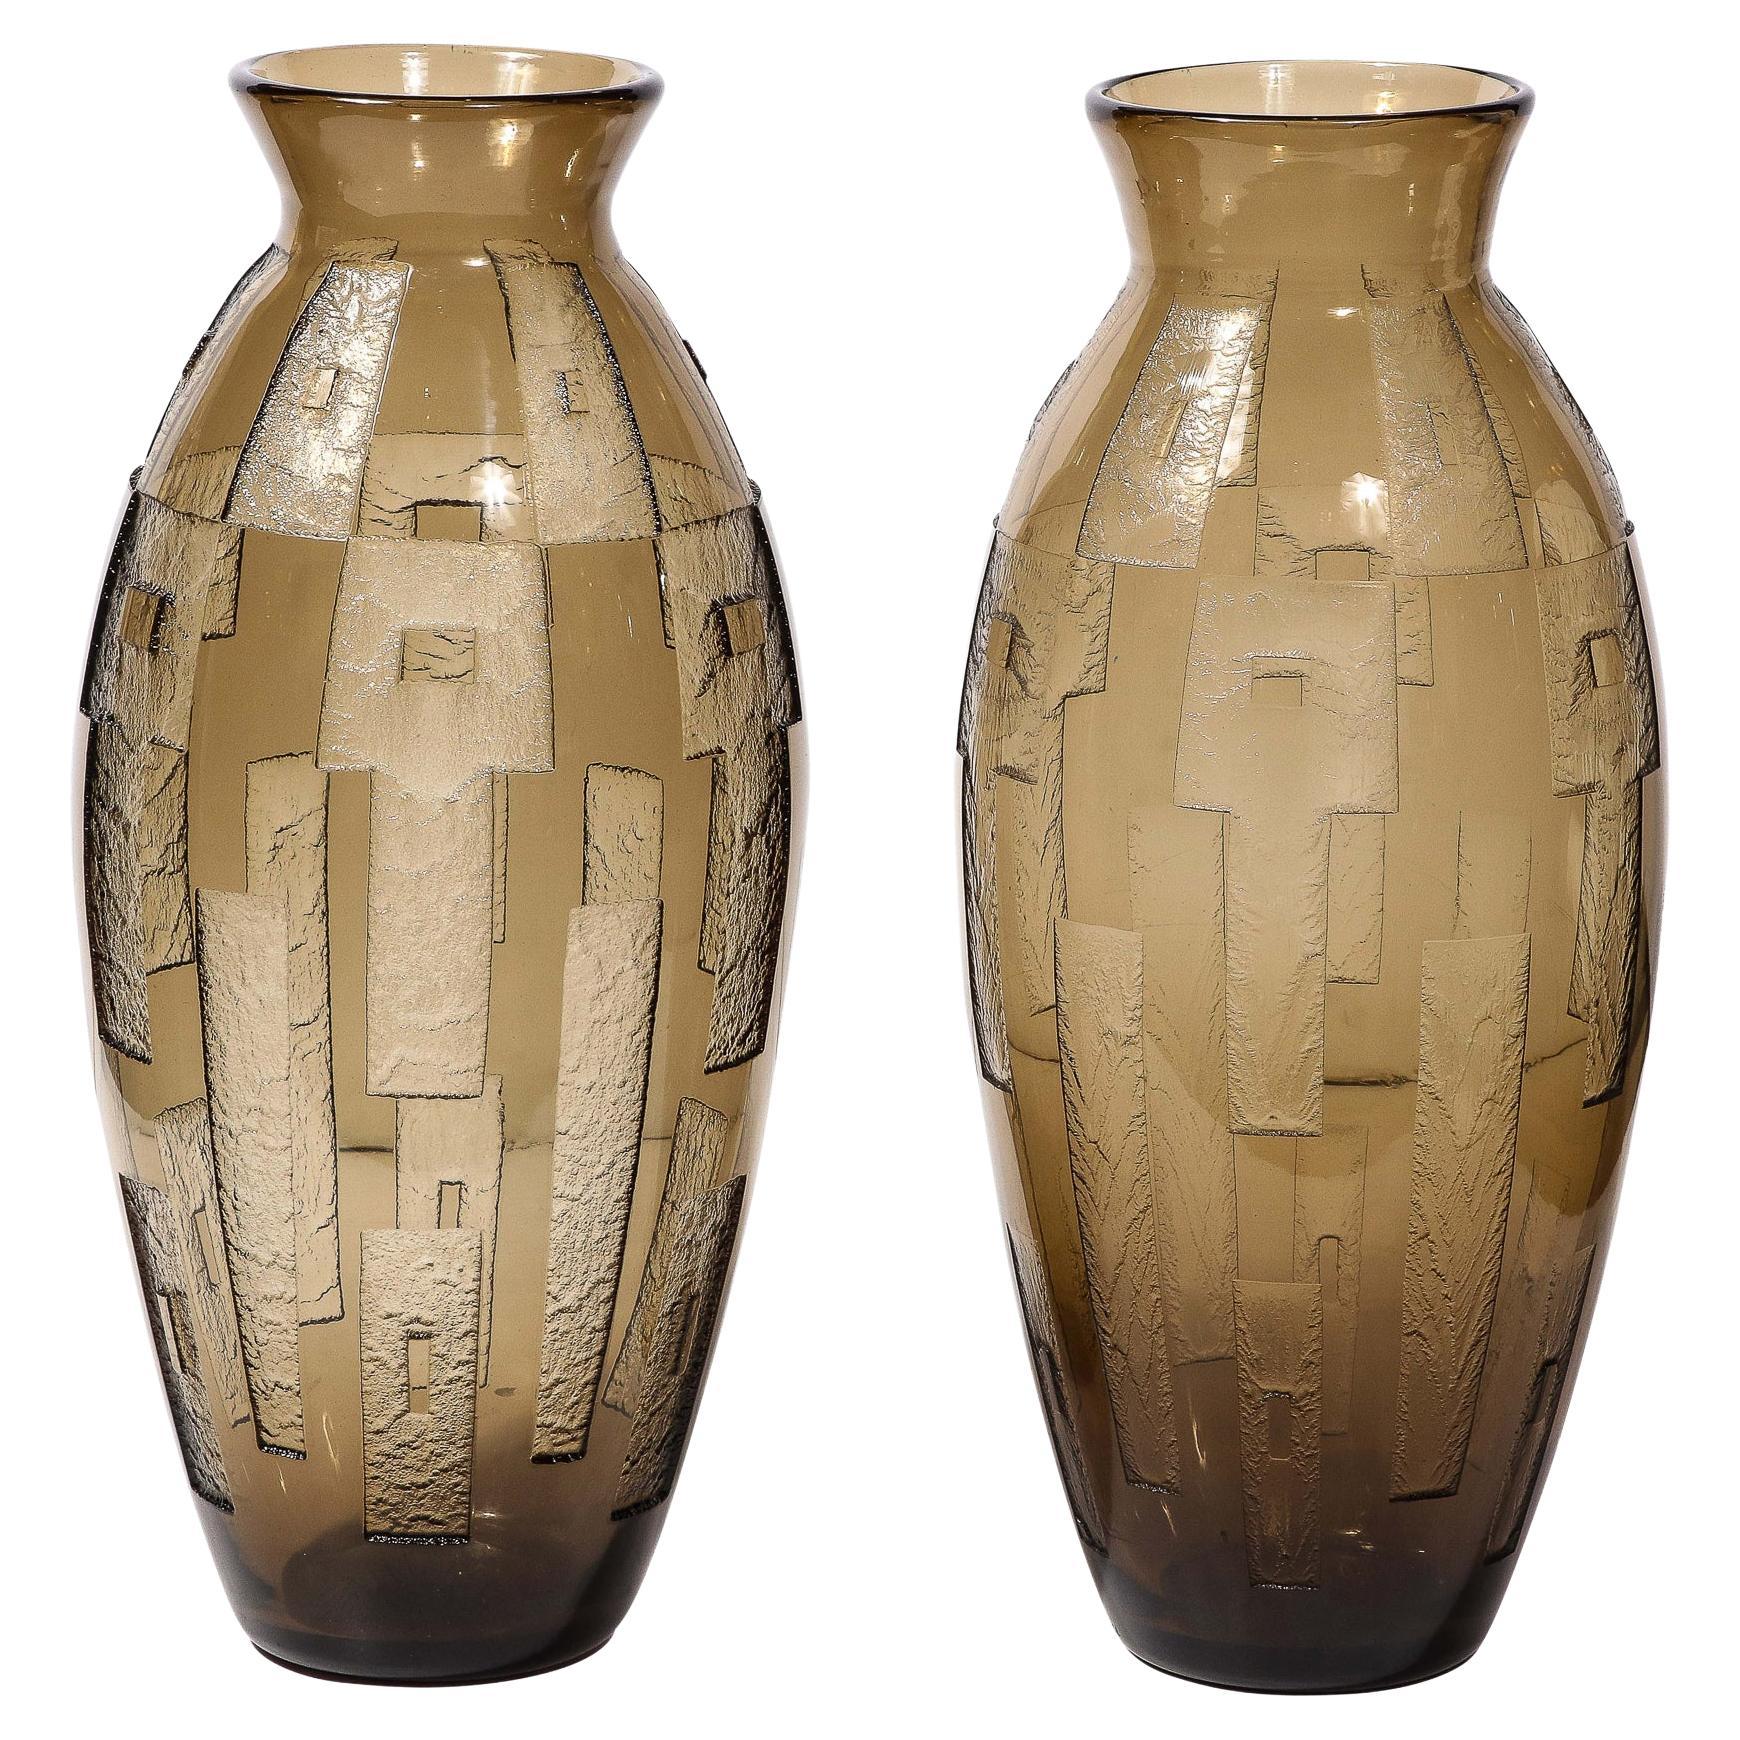 Pair of Art Deco Totem Form Vases in Acid Etched Smoked Geometric Glass by Daum